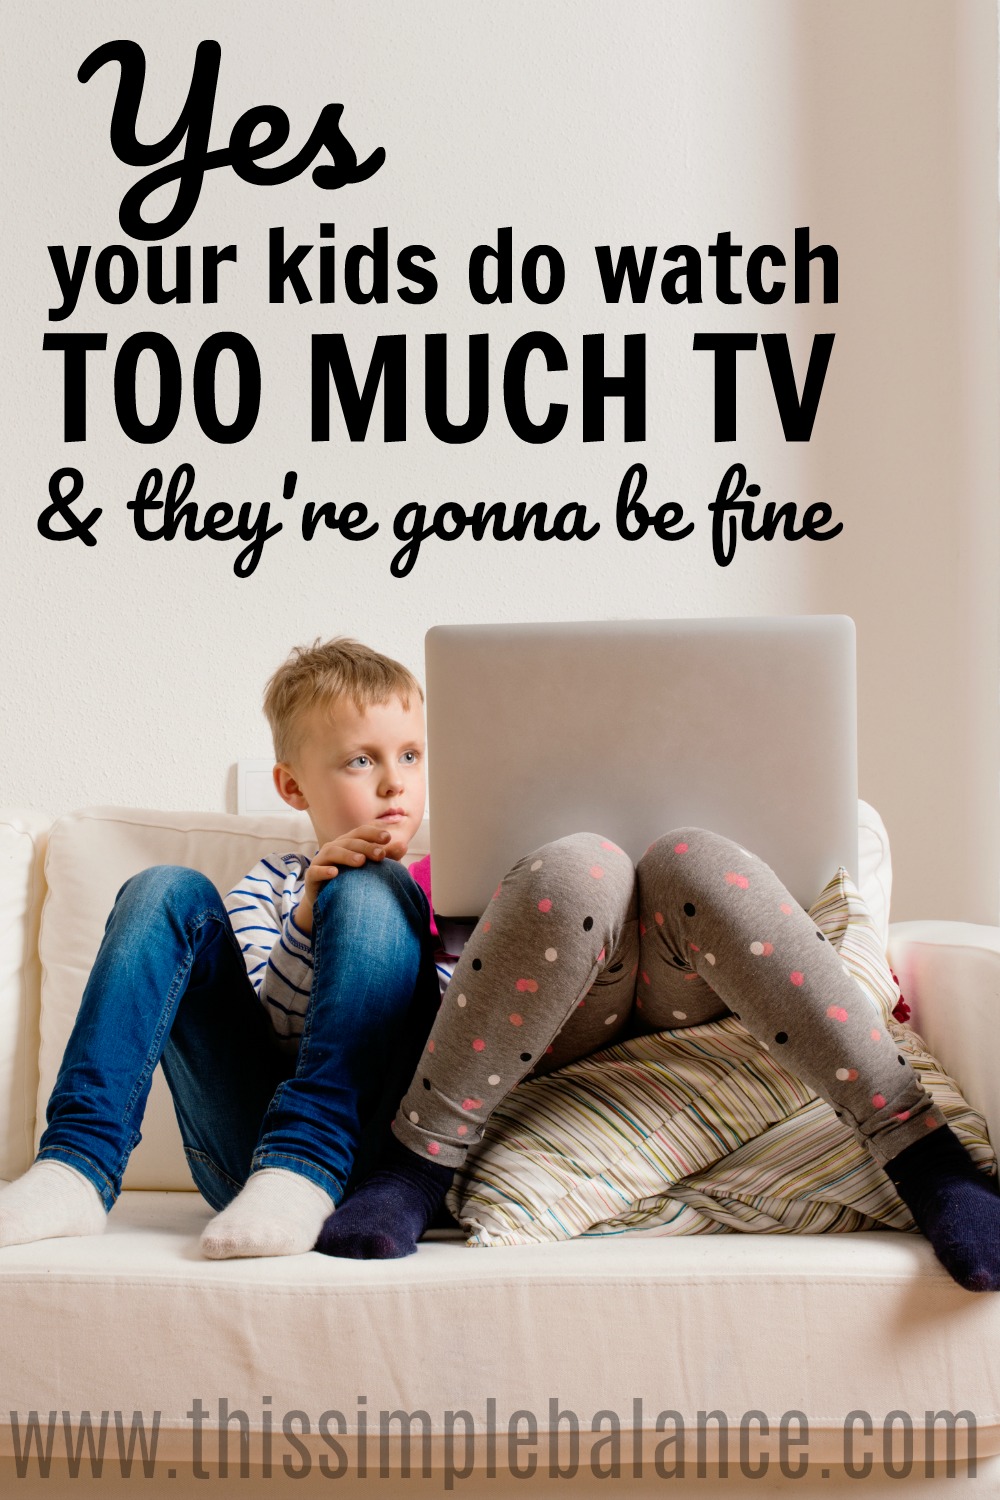 two children sitting on a couch using a computer laptop, with text overlay, "yes, your kids do watch too much tv & they're gonna be fine"